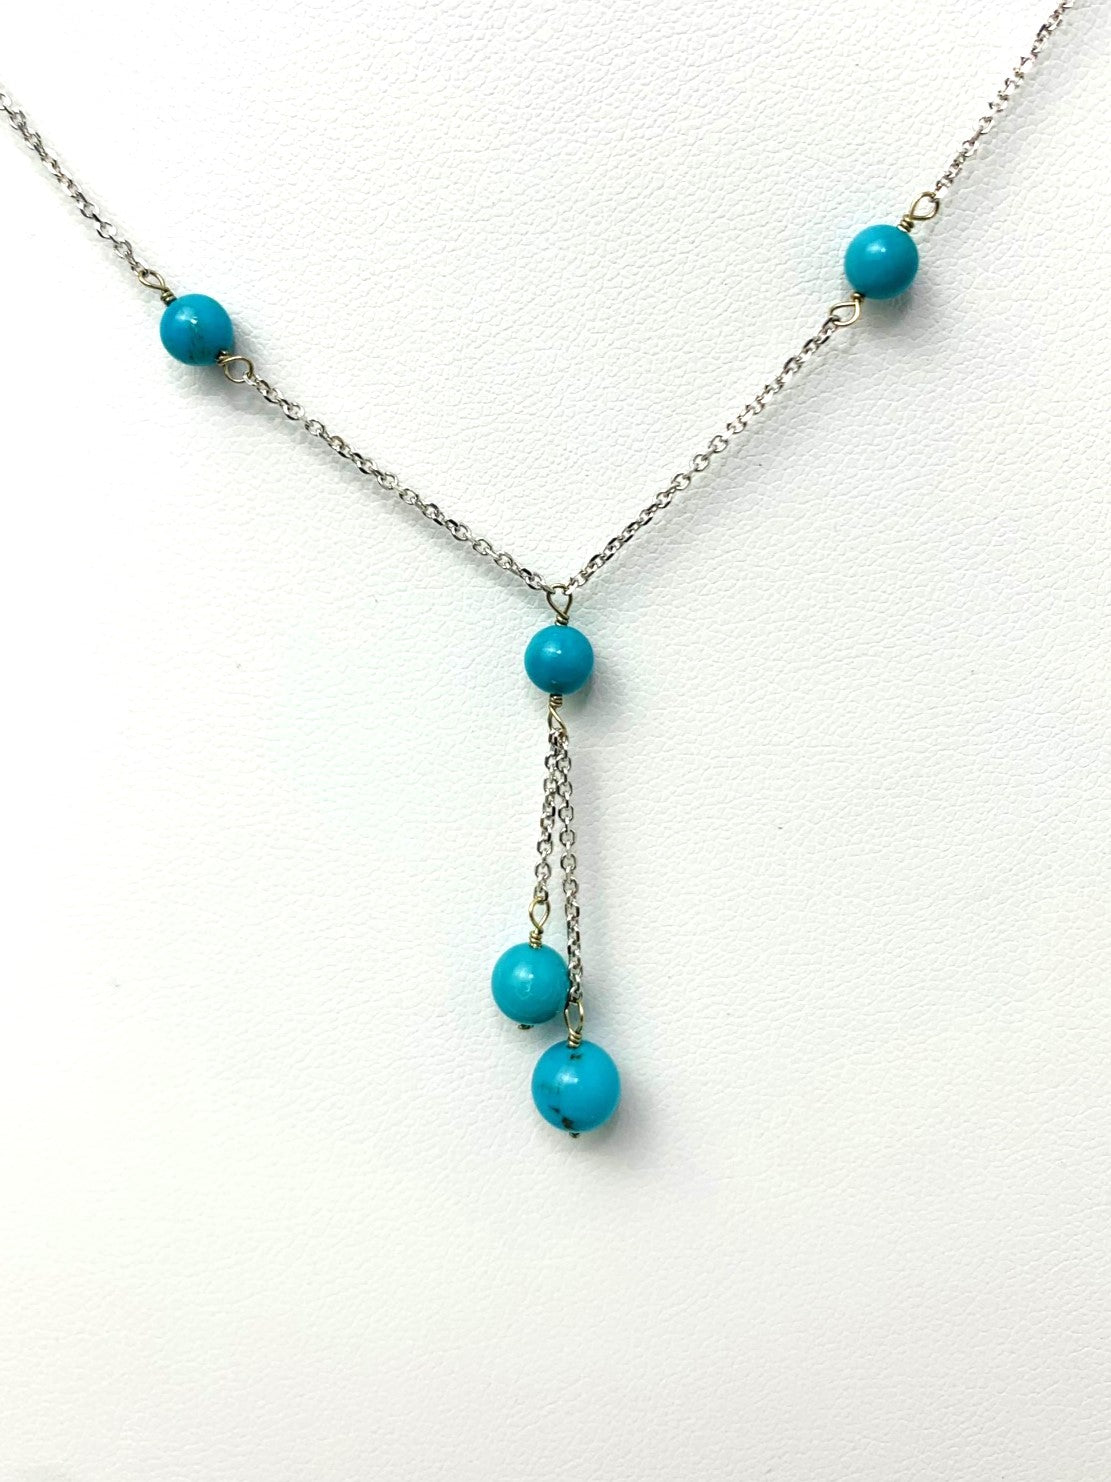 16" Turquoise Station Necklace in 14KW - NCK-427-LARGM14W-TQ-16-SM